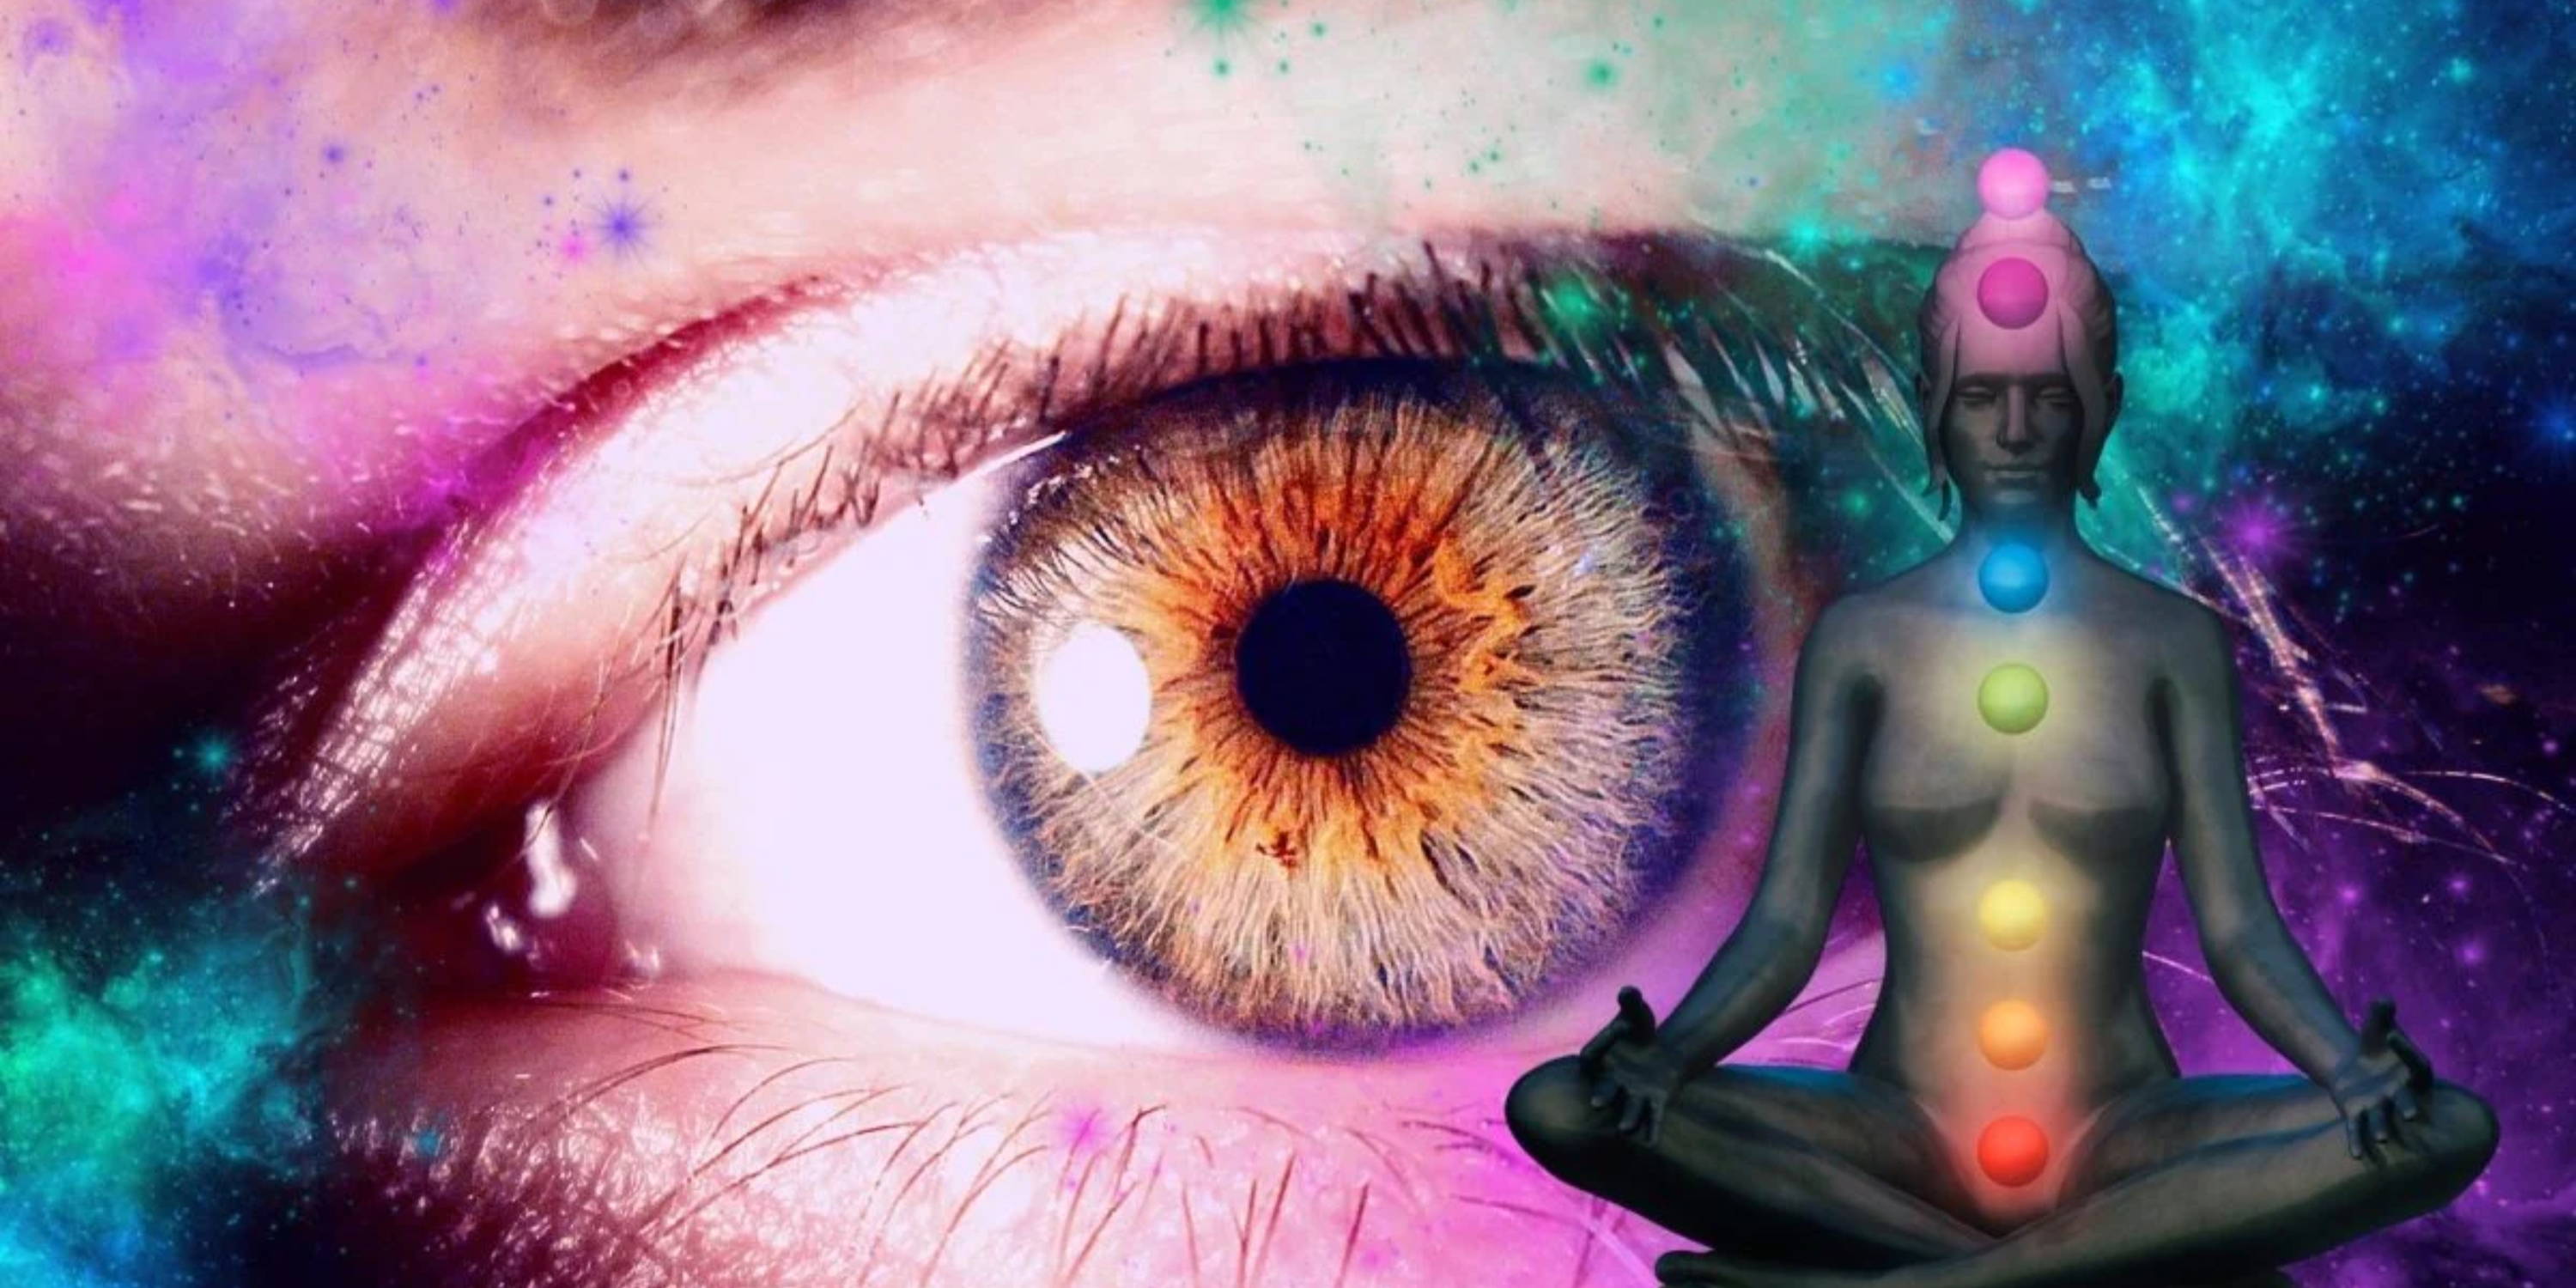 An eye covered by galaxies and a woman with chakras